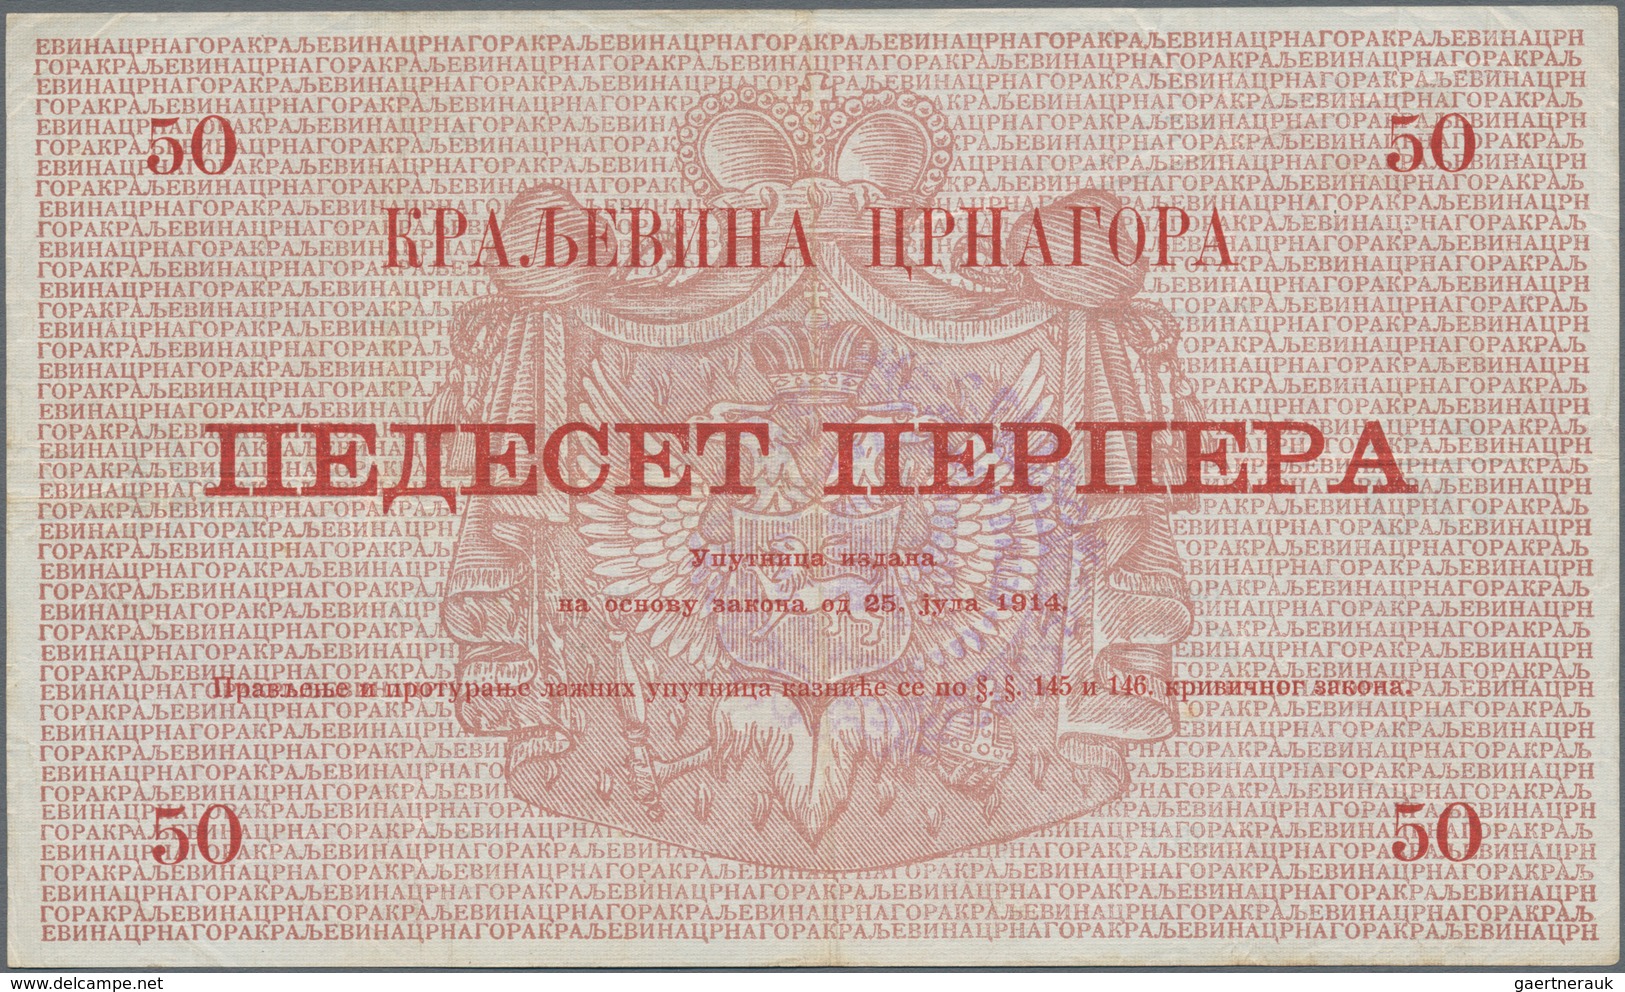 Montenegro: Military Government District Command set with 9 banknotes of the 1914 (1916) handstamped